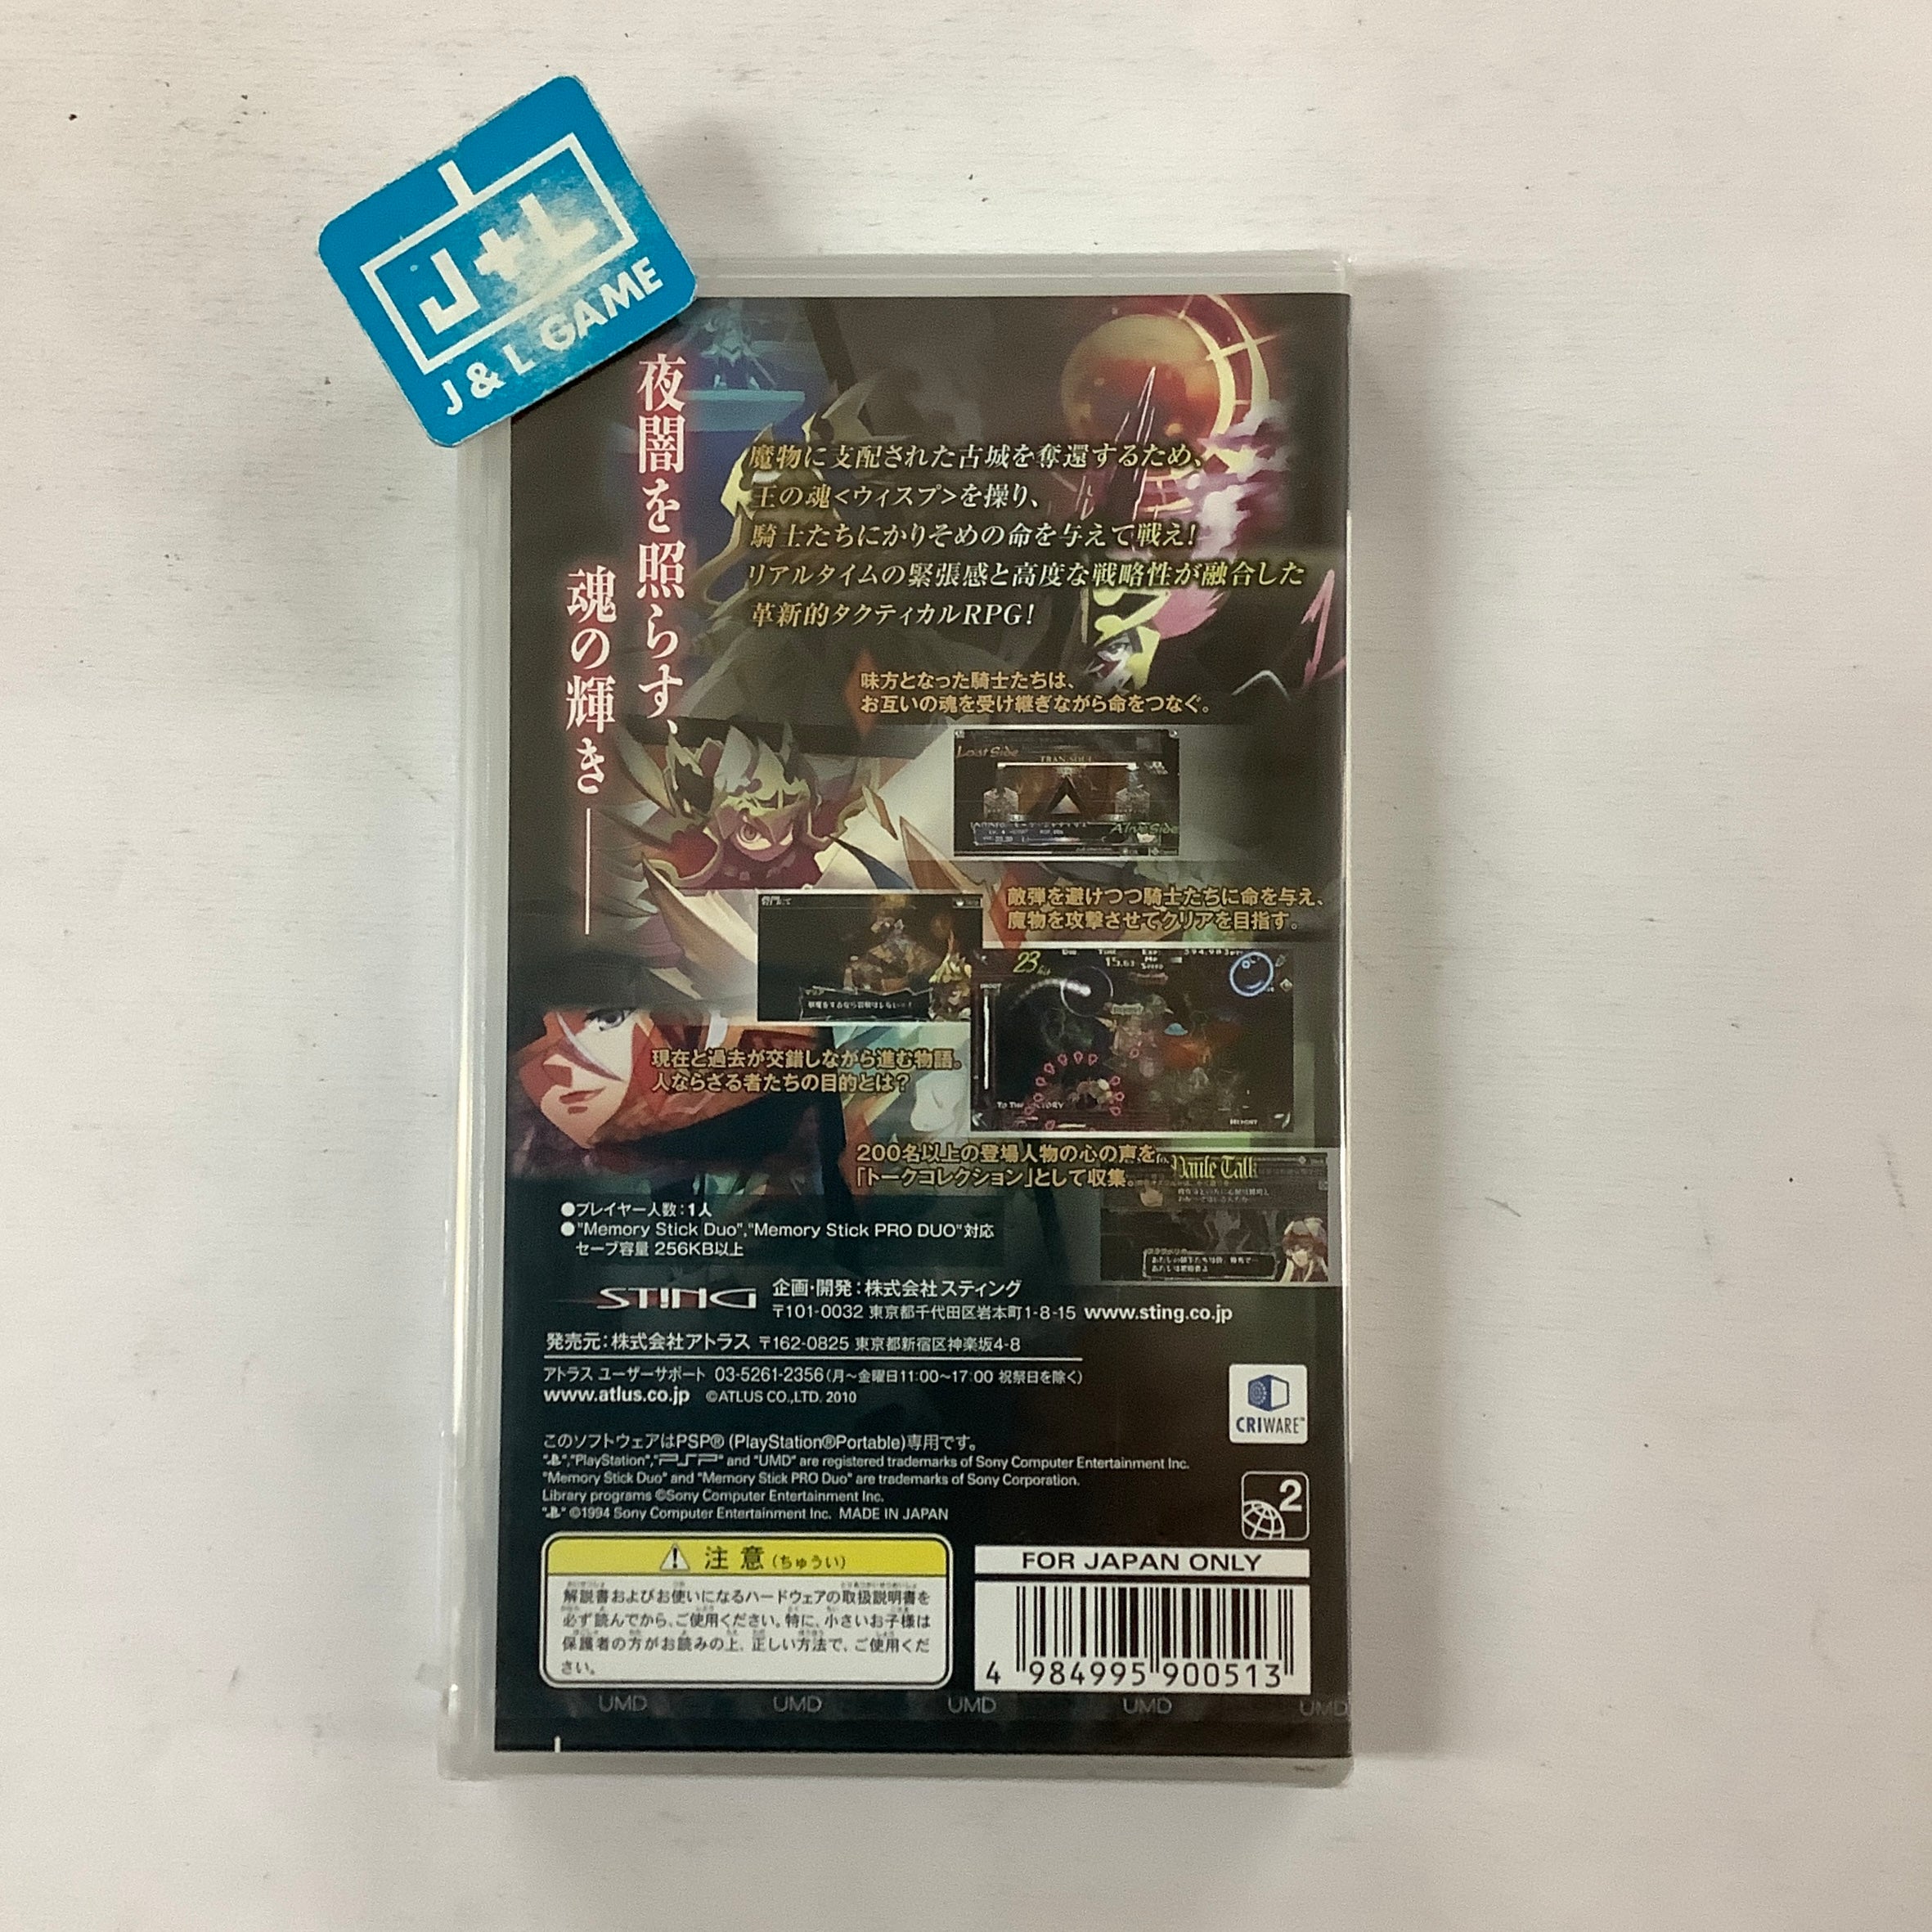 Knights in the Nightmare - Sony PSP (Japanese Import) Video Games Atlus   